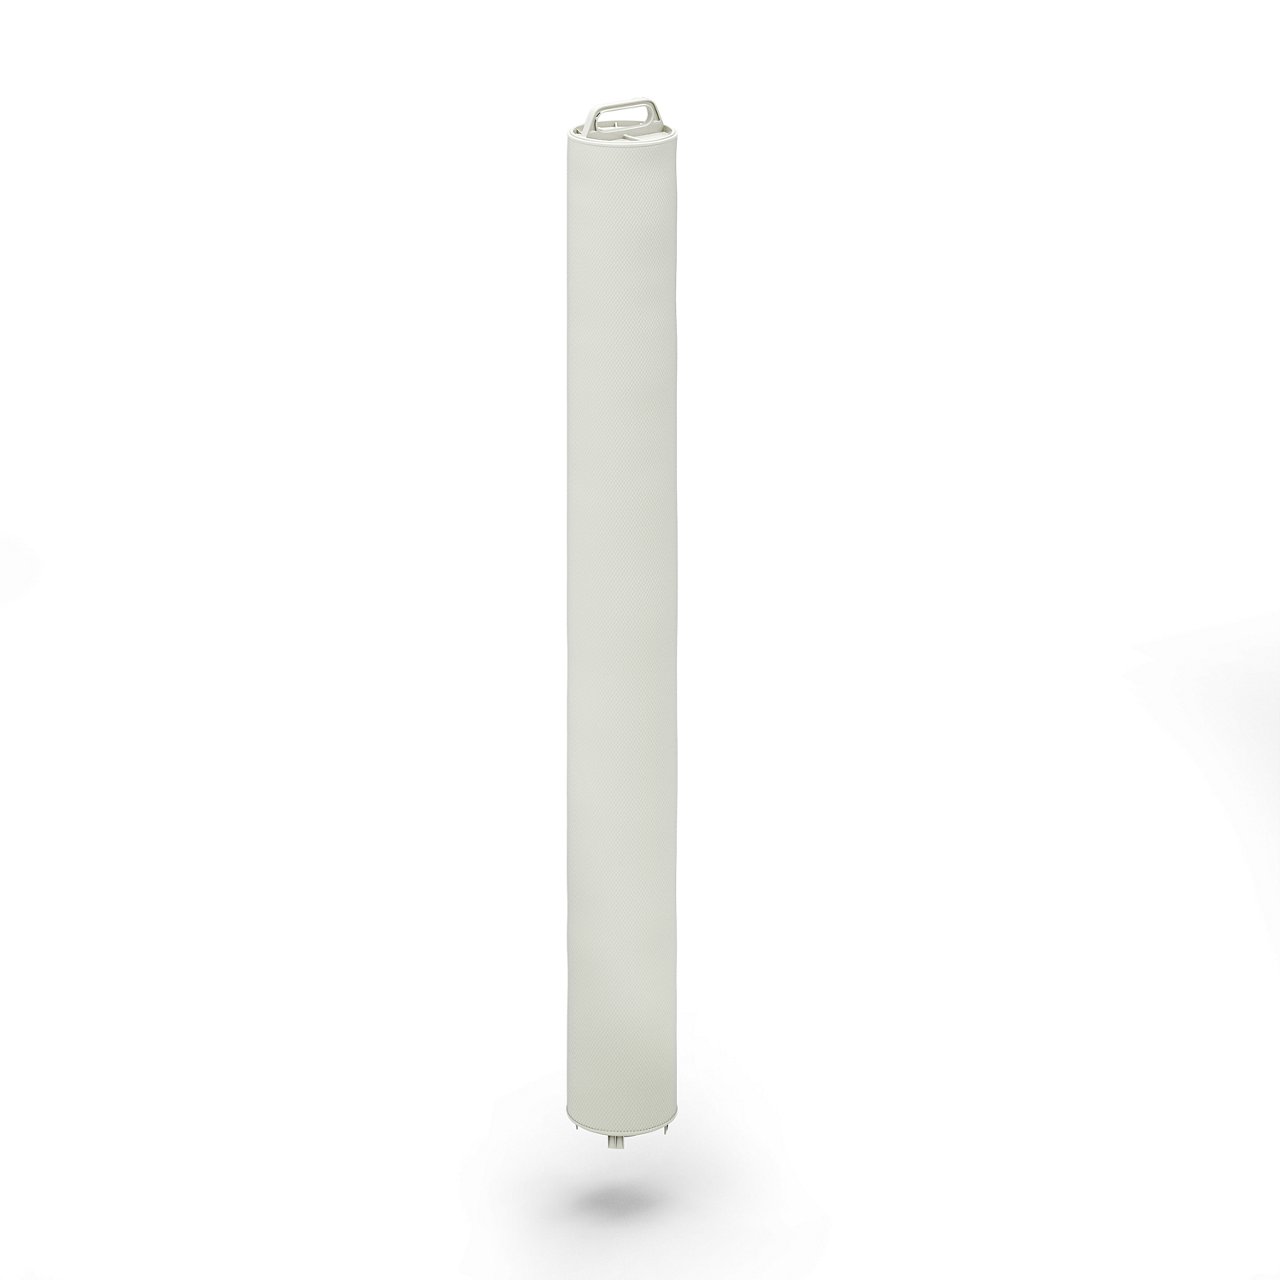 Rendered image of the 3M™ High Flow Series Filter Cartridge